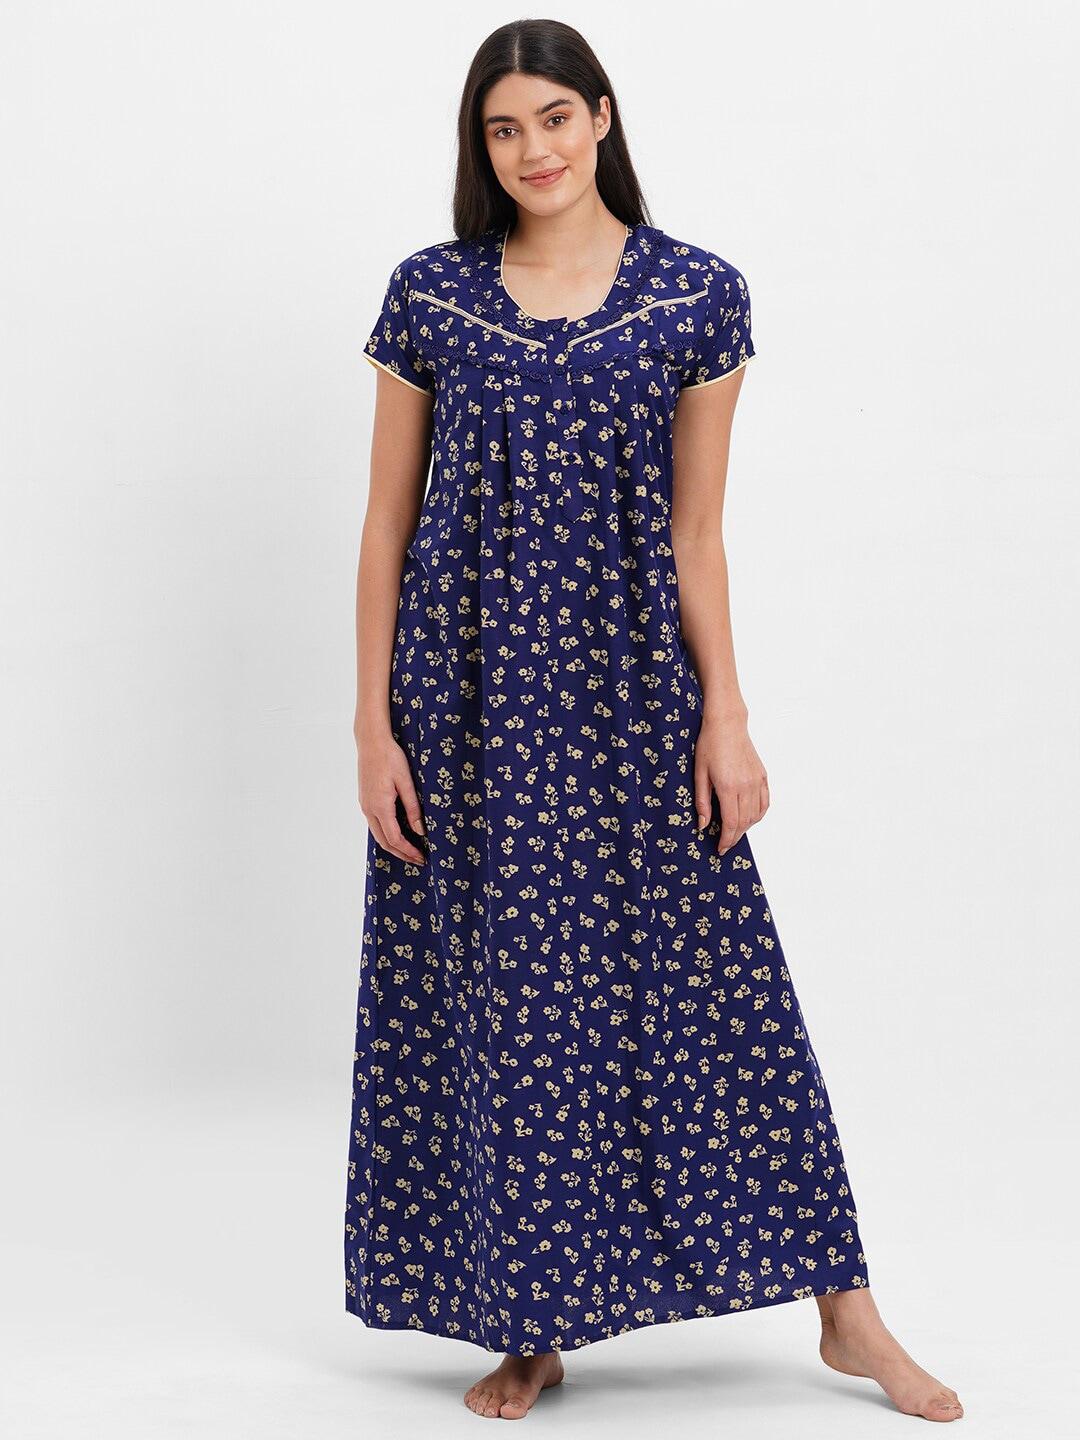 Sweet Dreams Navy Blue Floral Printed Maxi Nightdress